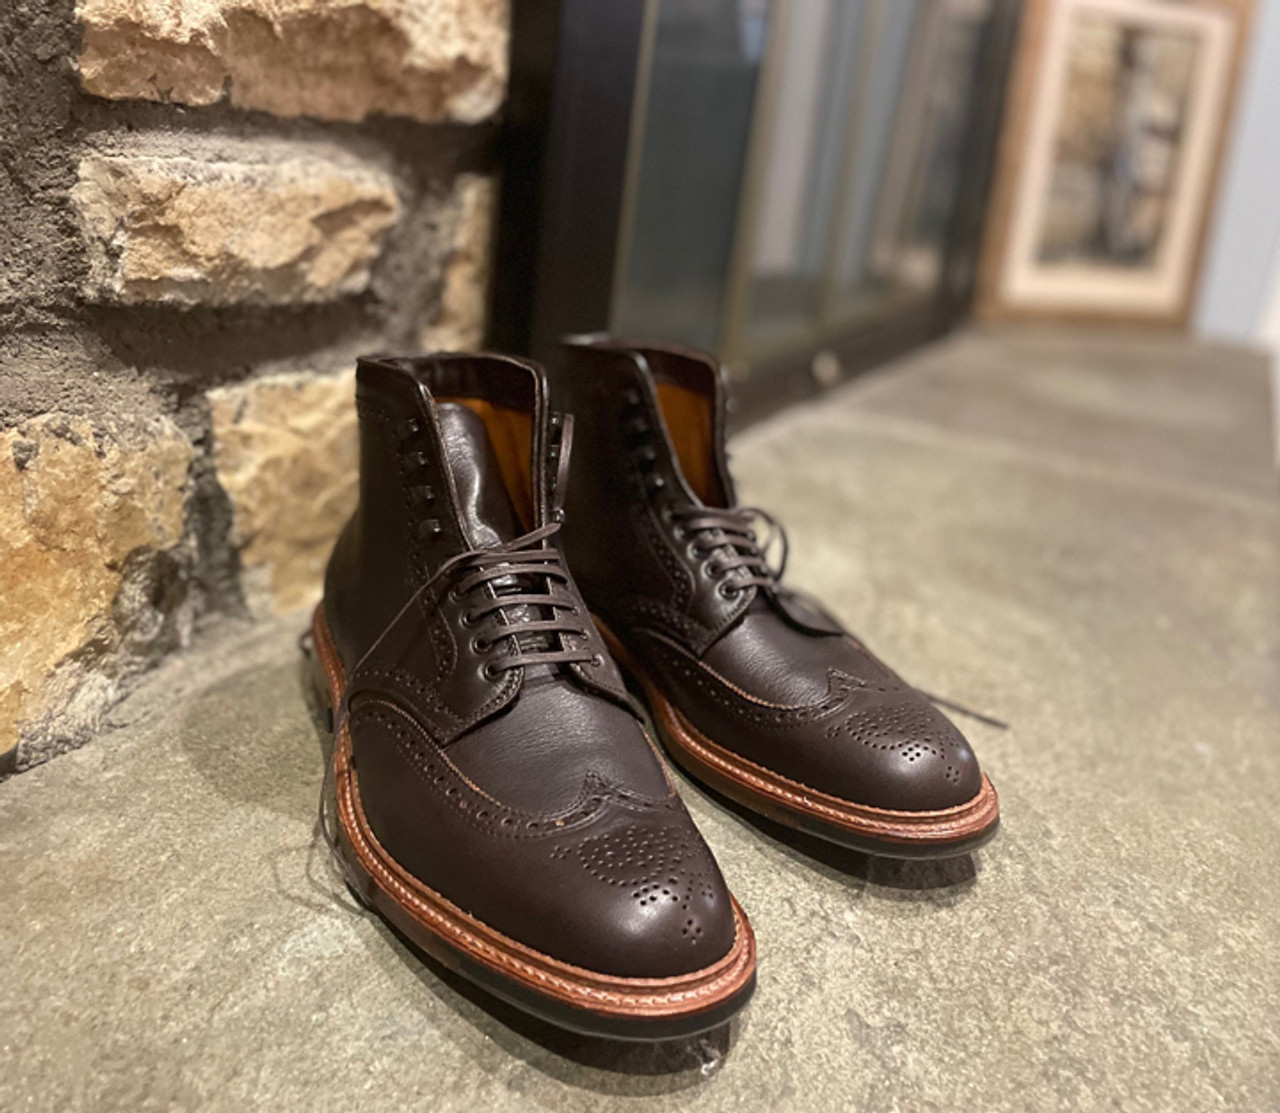 Limited Edition Ardmore Wing Tip Boot in Arabica Lux Calfskin with ...